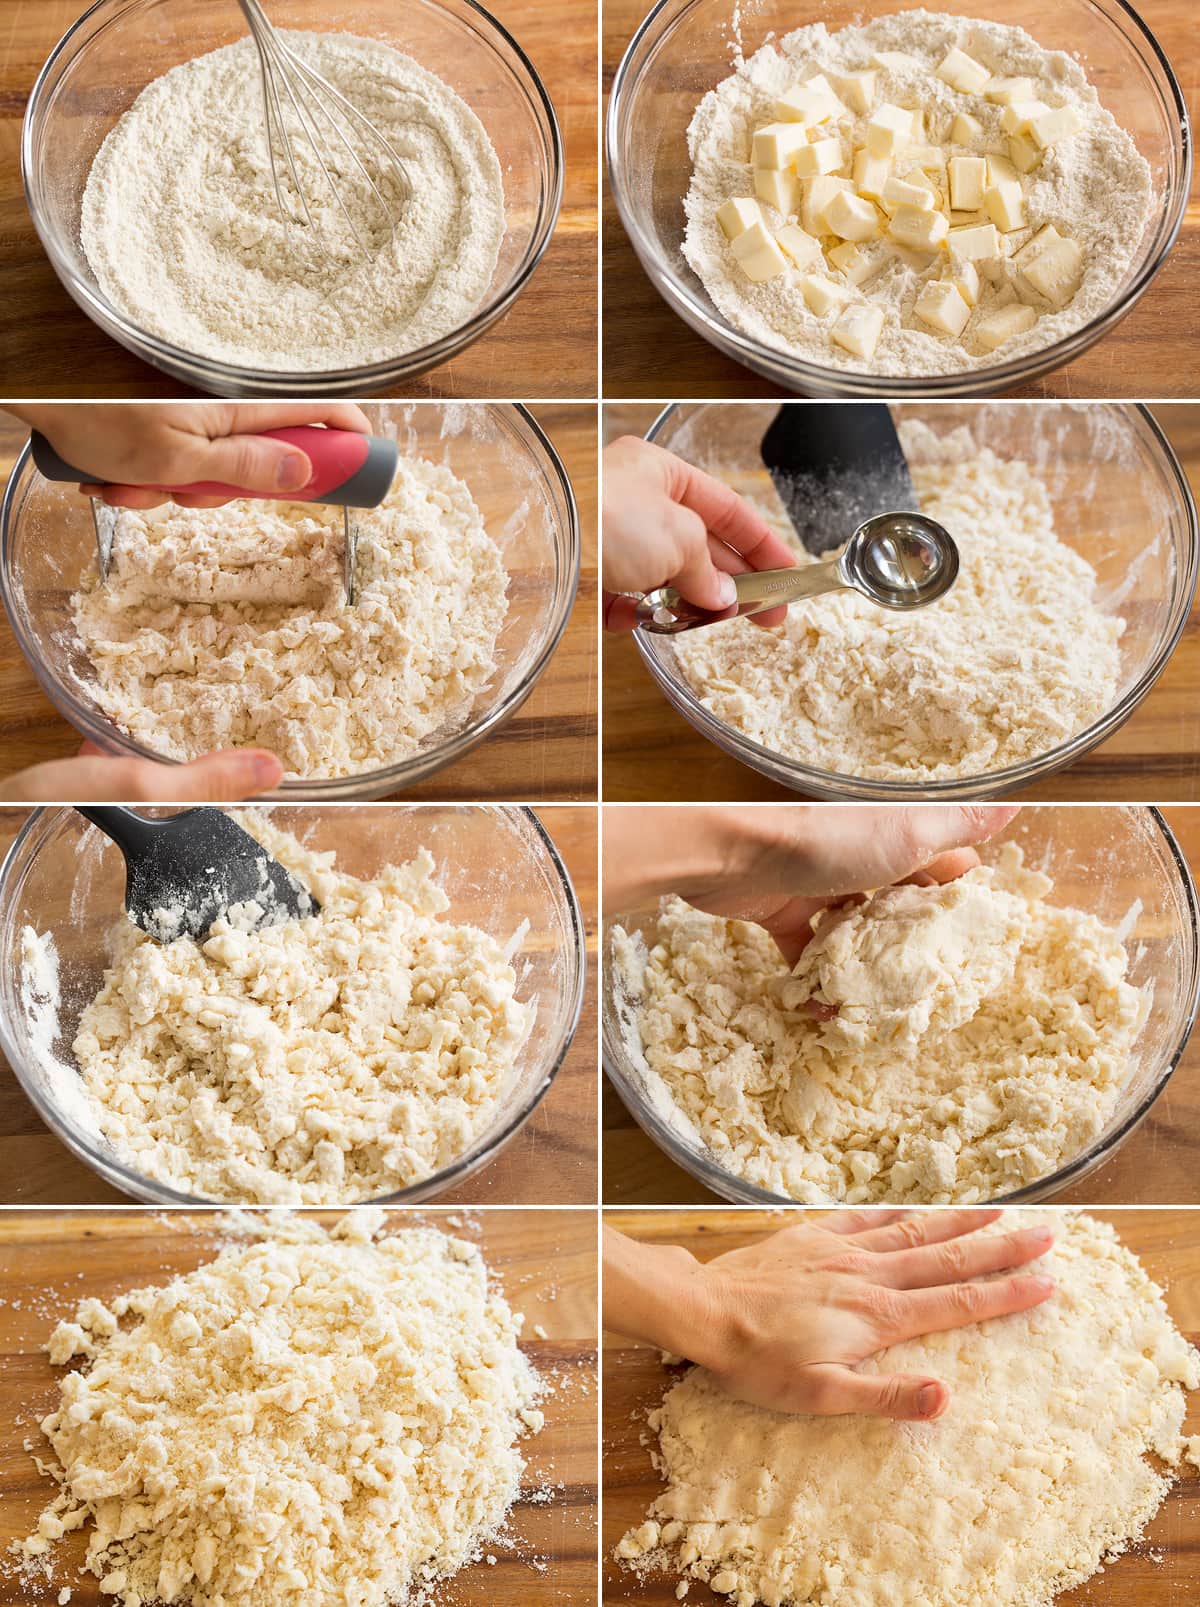 Collage of eight images showing how to prepare pie crust dough.